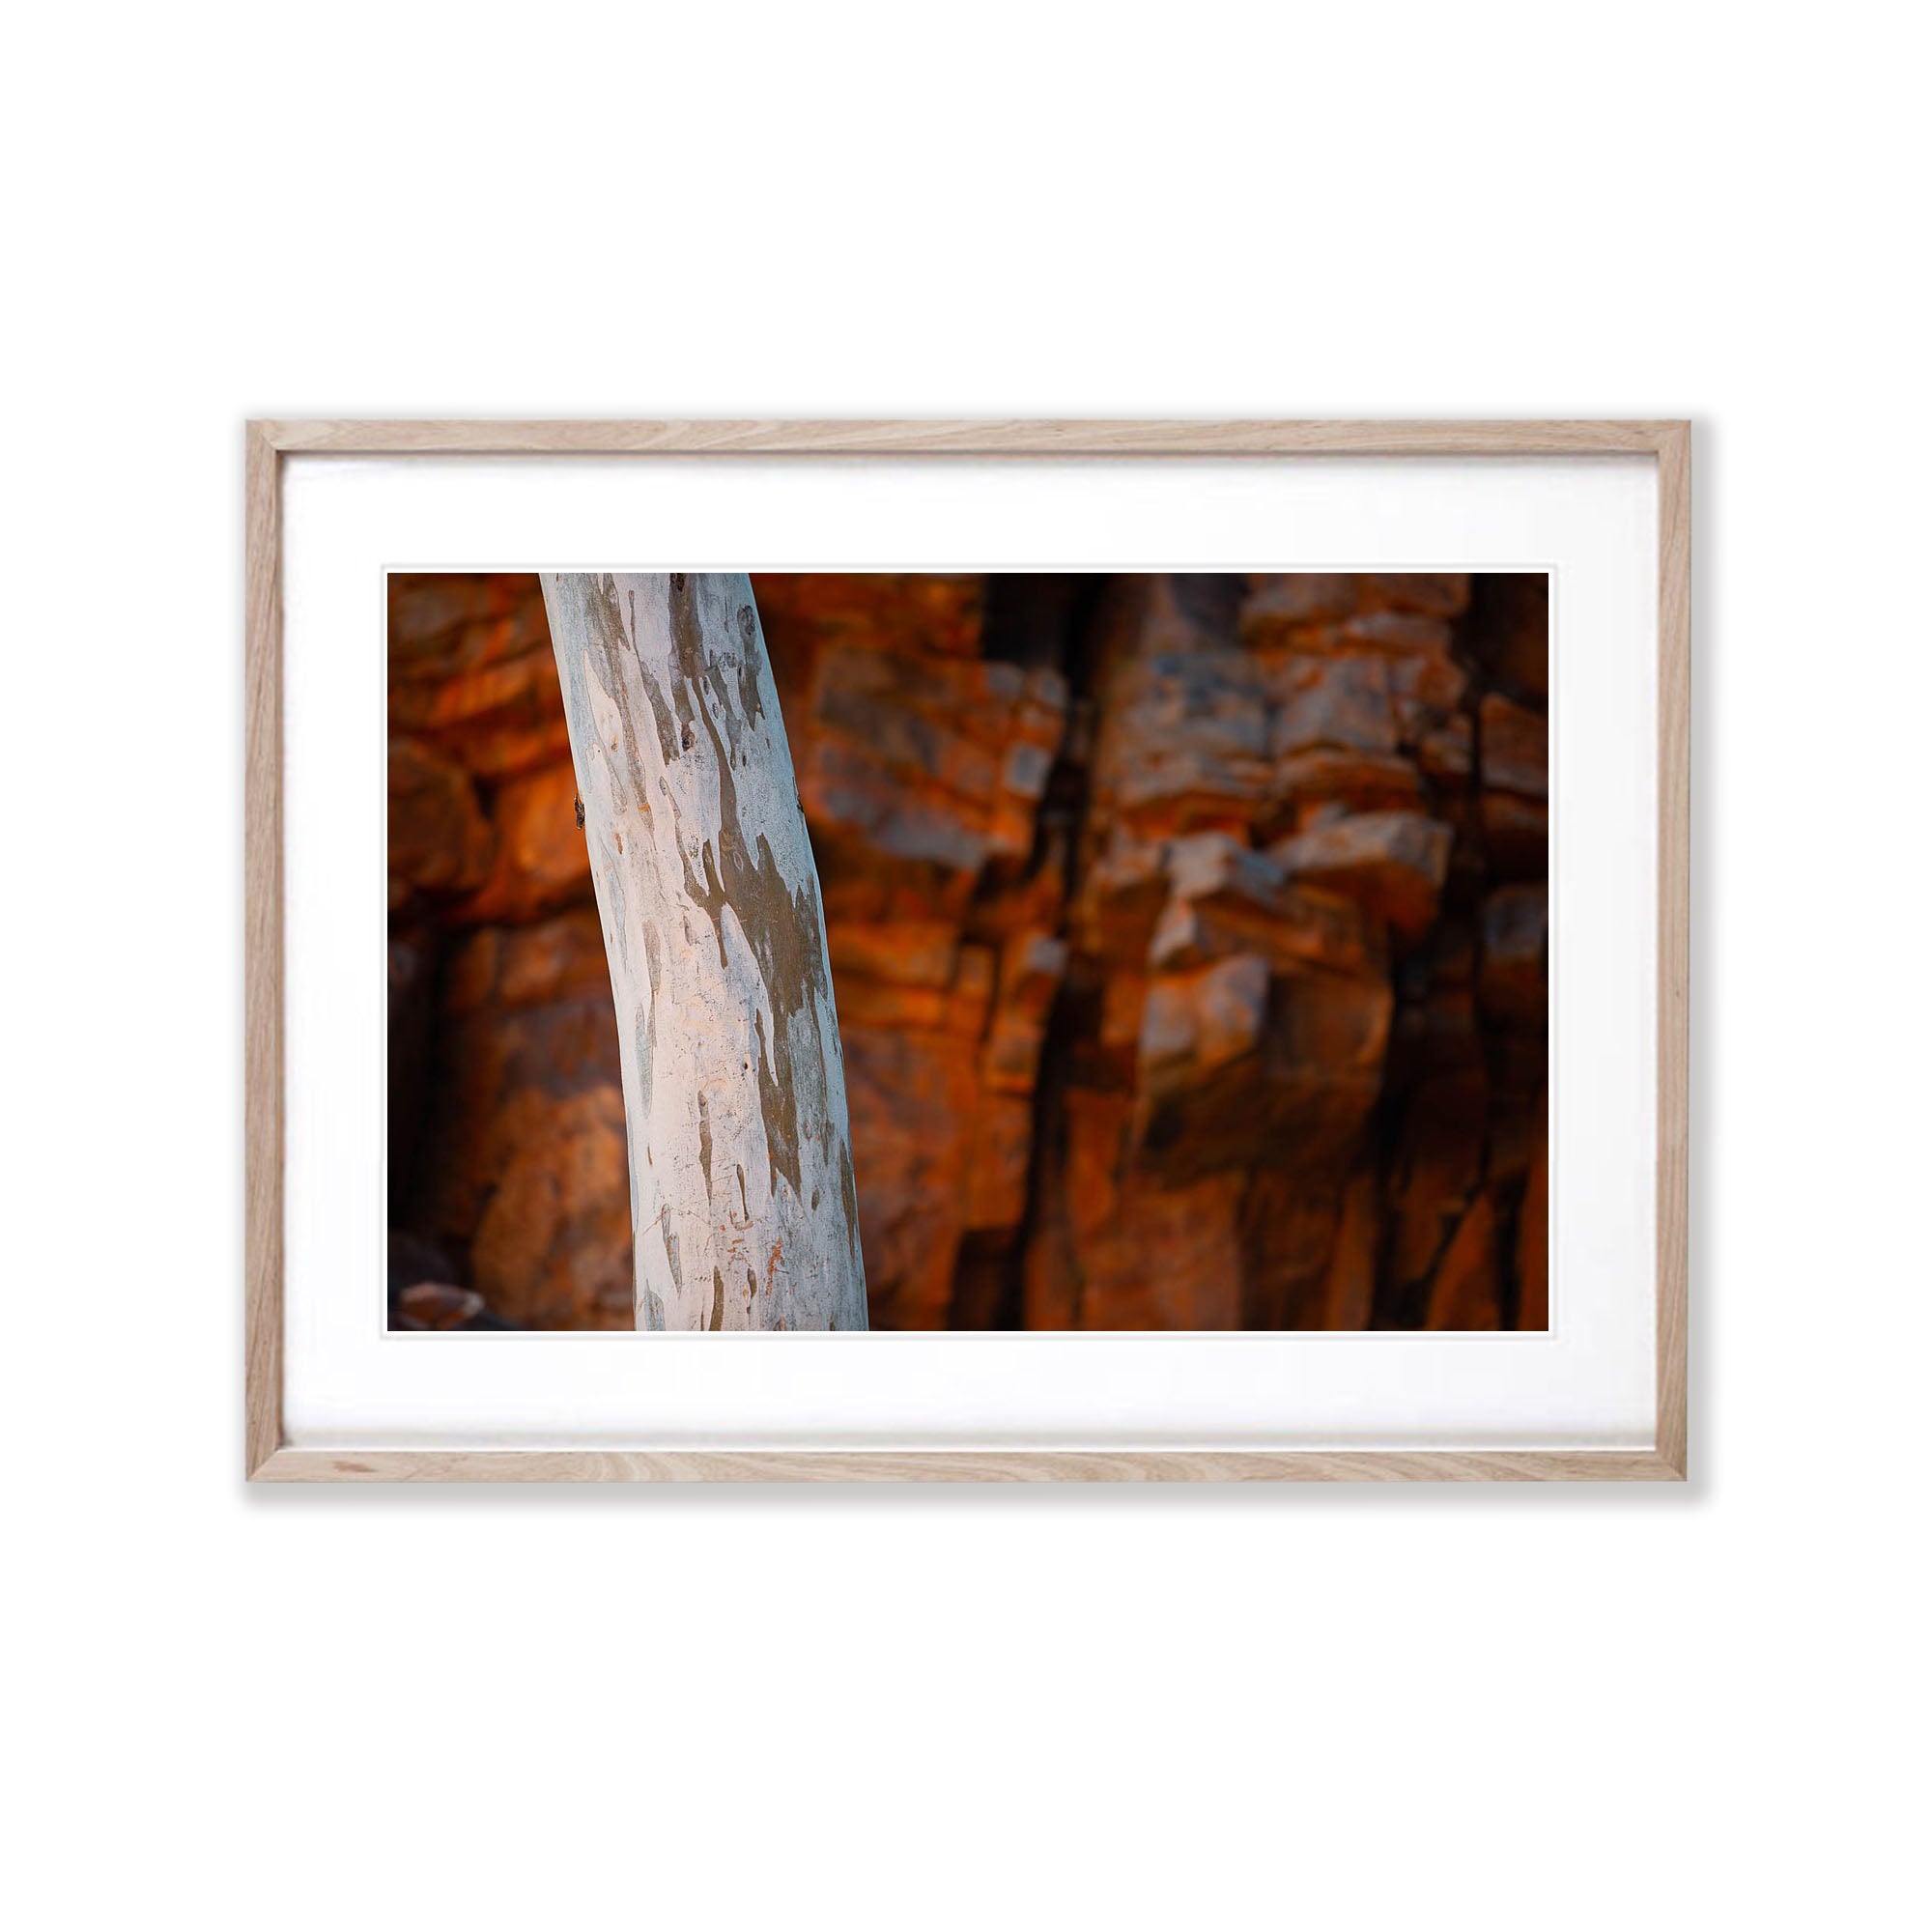 Inland Gumtree Trunk, West MacDonnell Ranges - Northern Territory